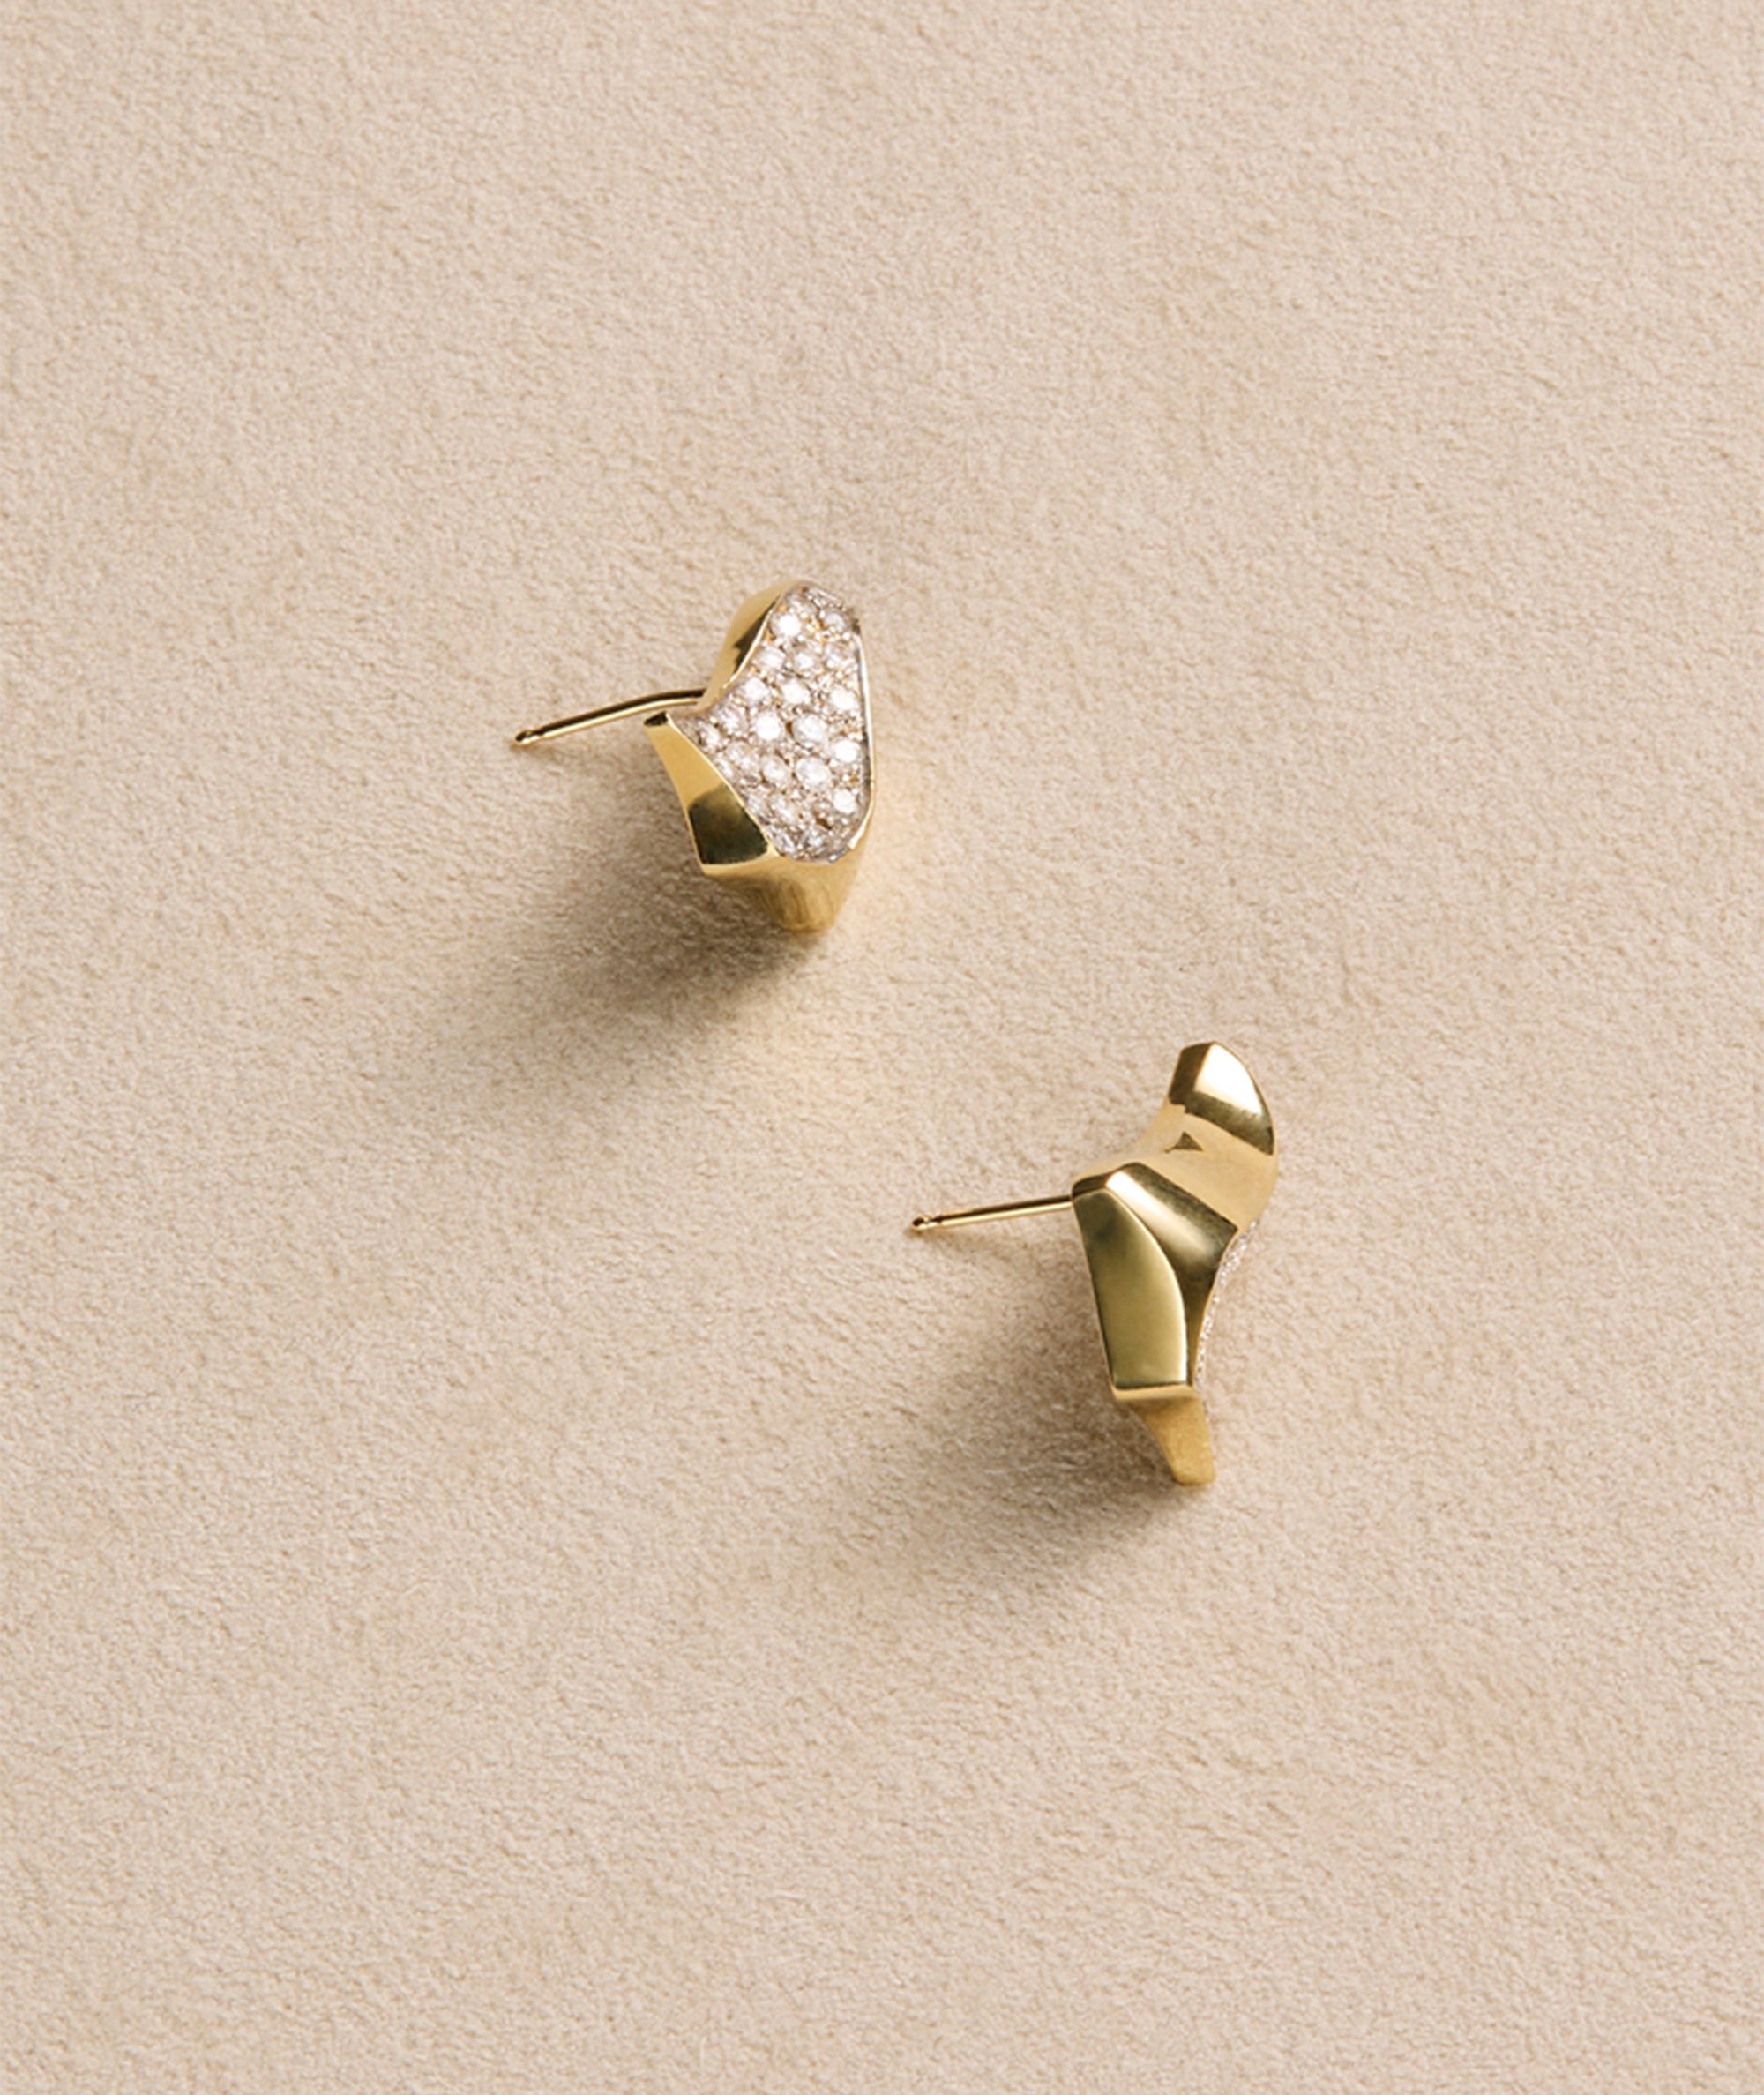 Vintage earrings in yellow gold with diamonds. Exclusively sourced for EREDE Curated.